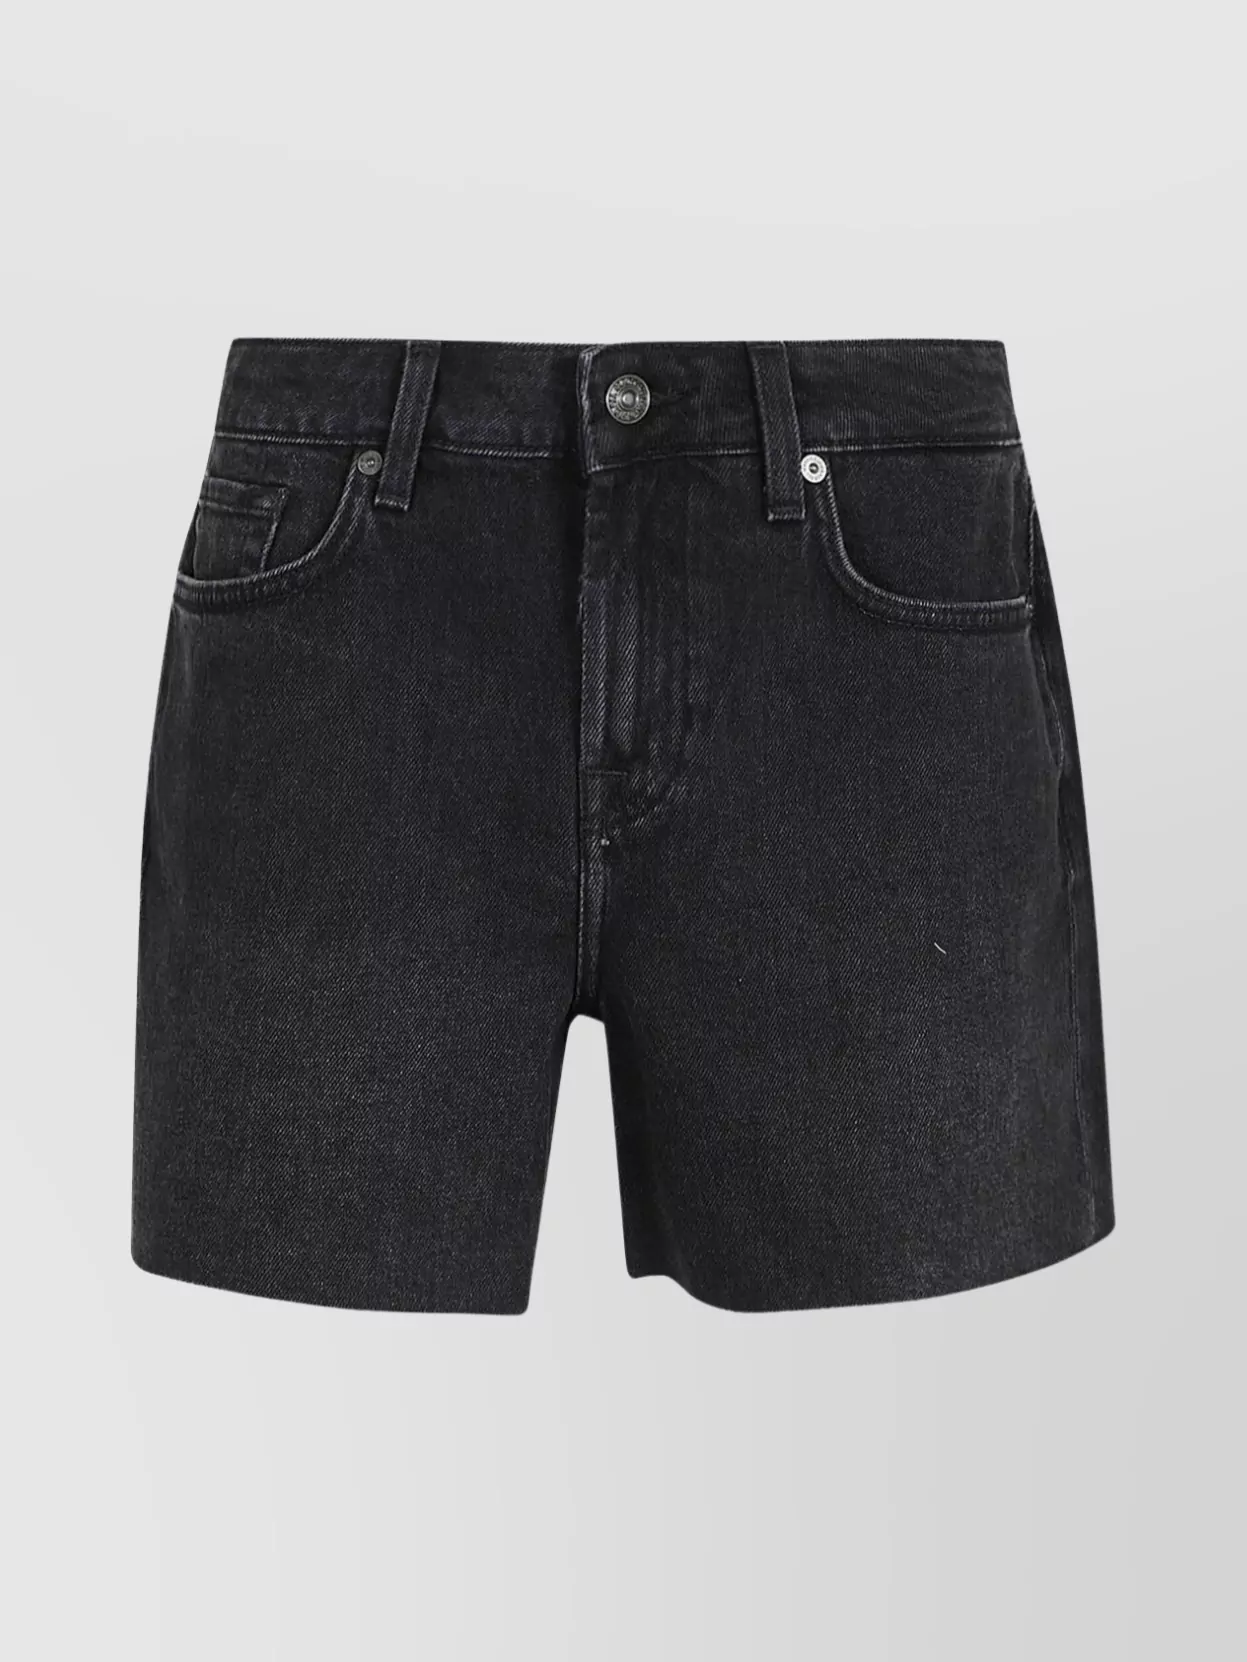 Shop 7 For All Mankind Long Shorts With Belt Loops And Frayed Hem